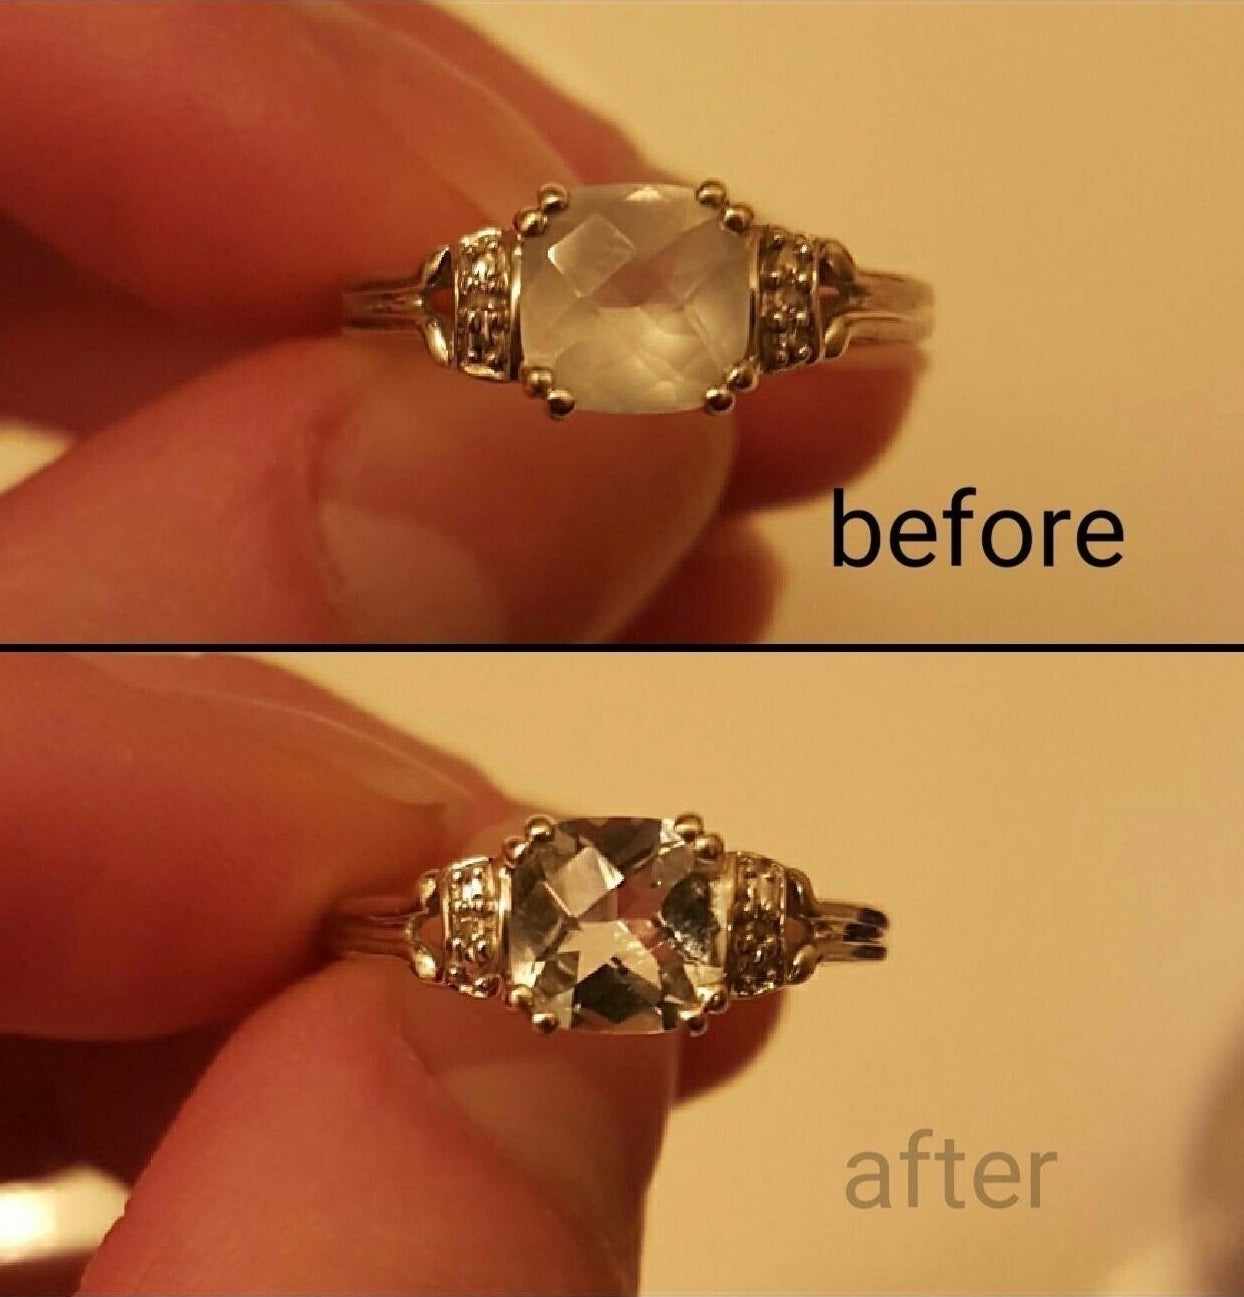 A before-and-after photo showing the results of the pen cleaner on a ring